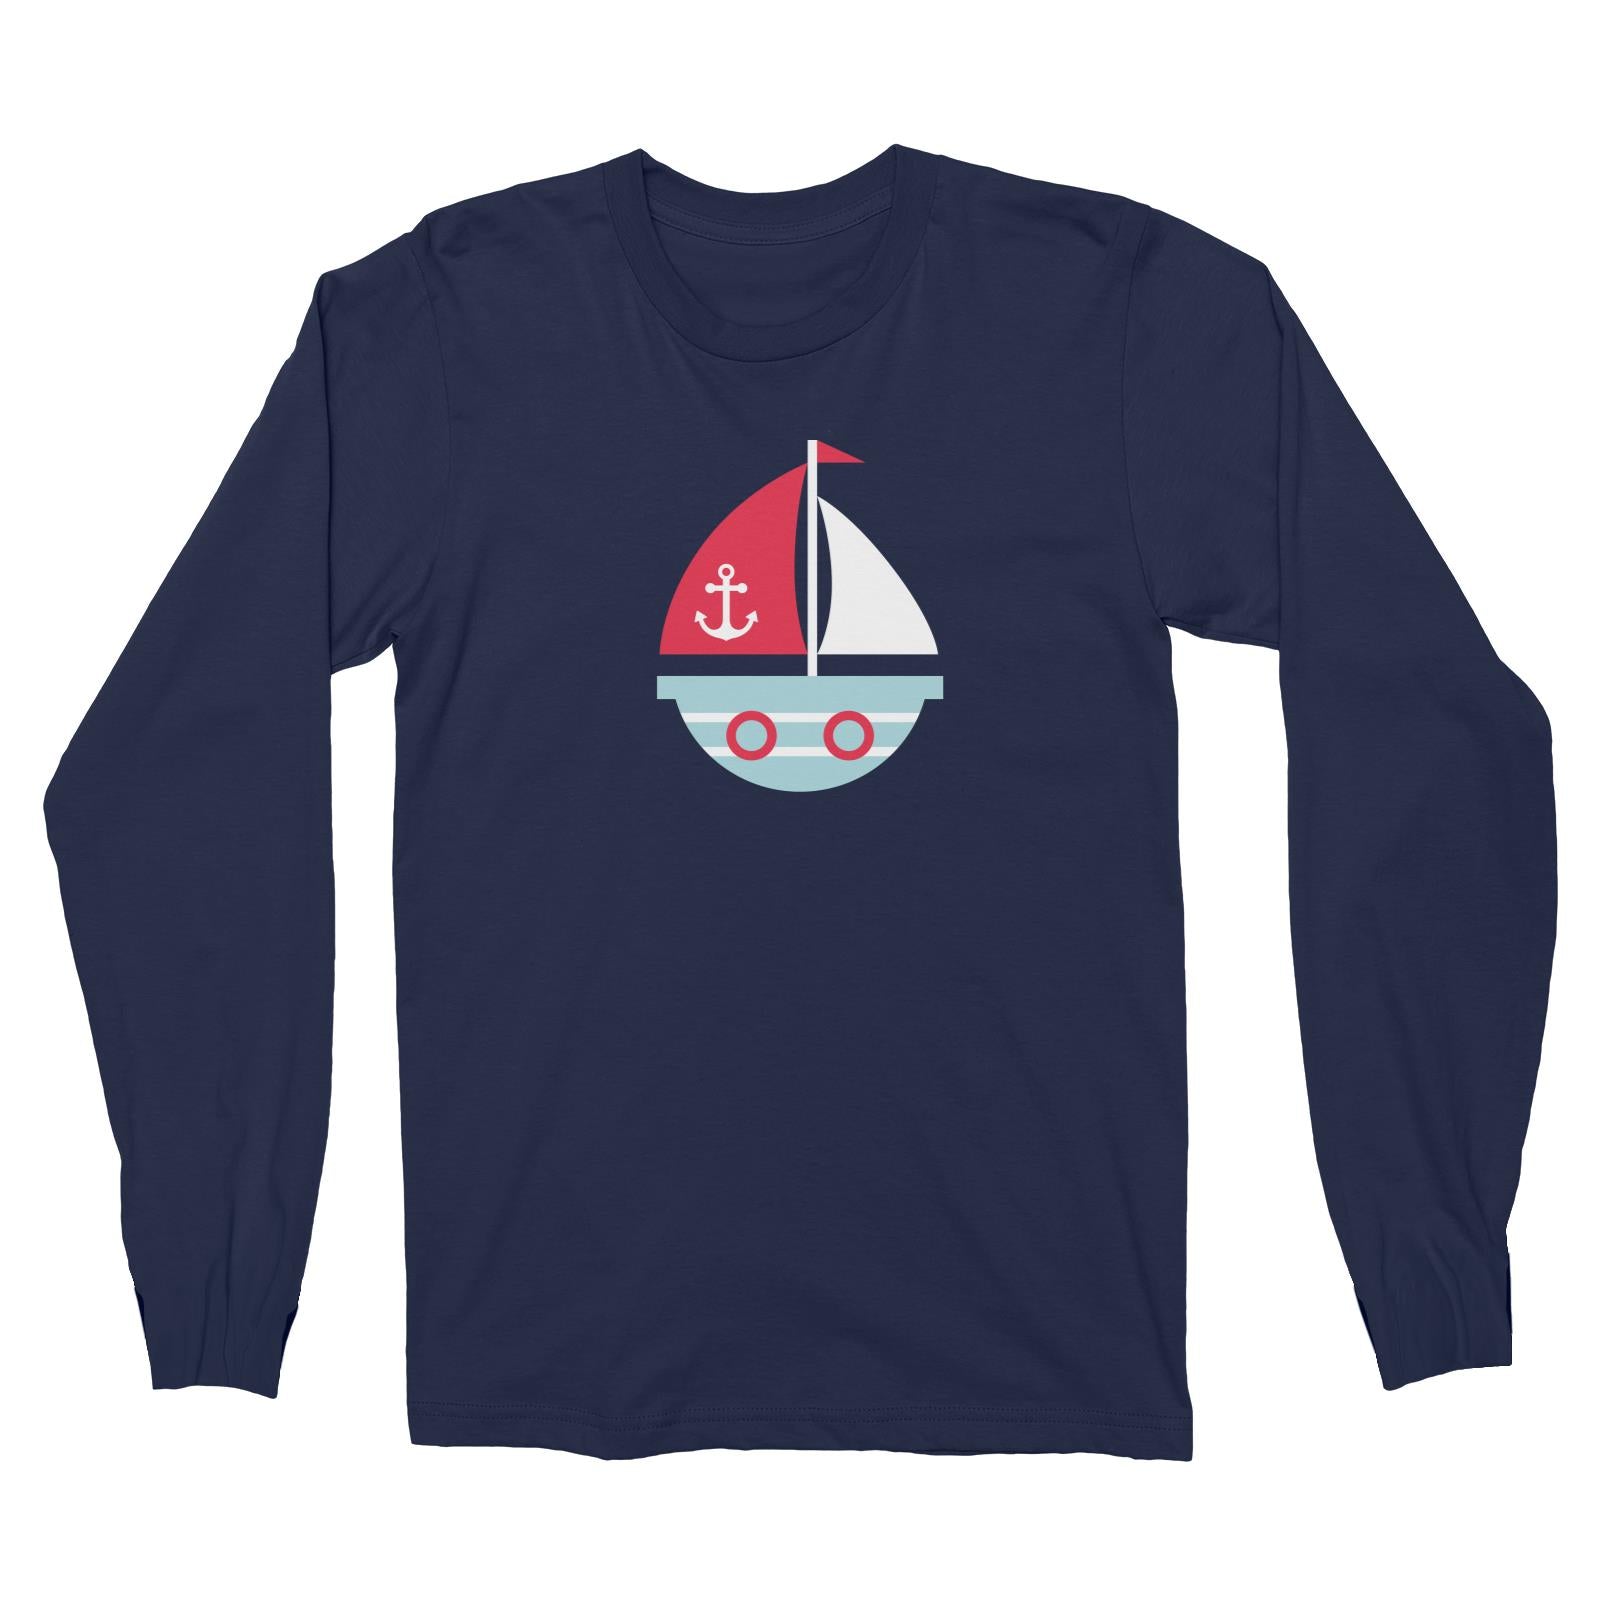 Sailor Boat Long Sleeve Unisex T-Shirt  Matching Family Personalizable Designs